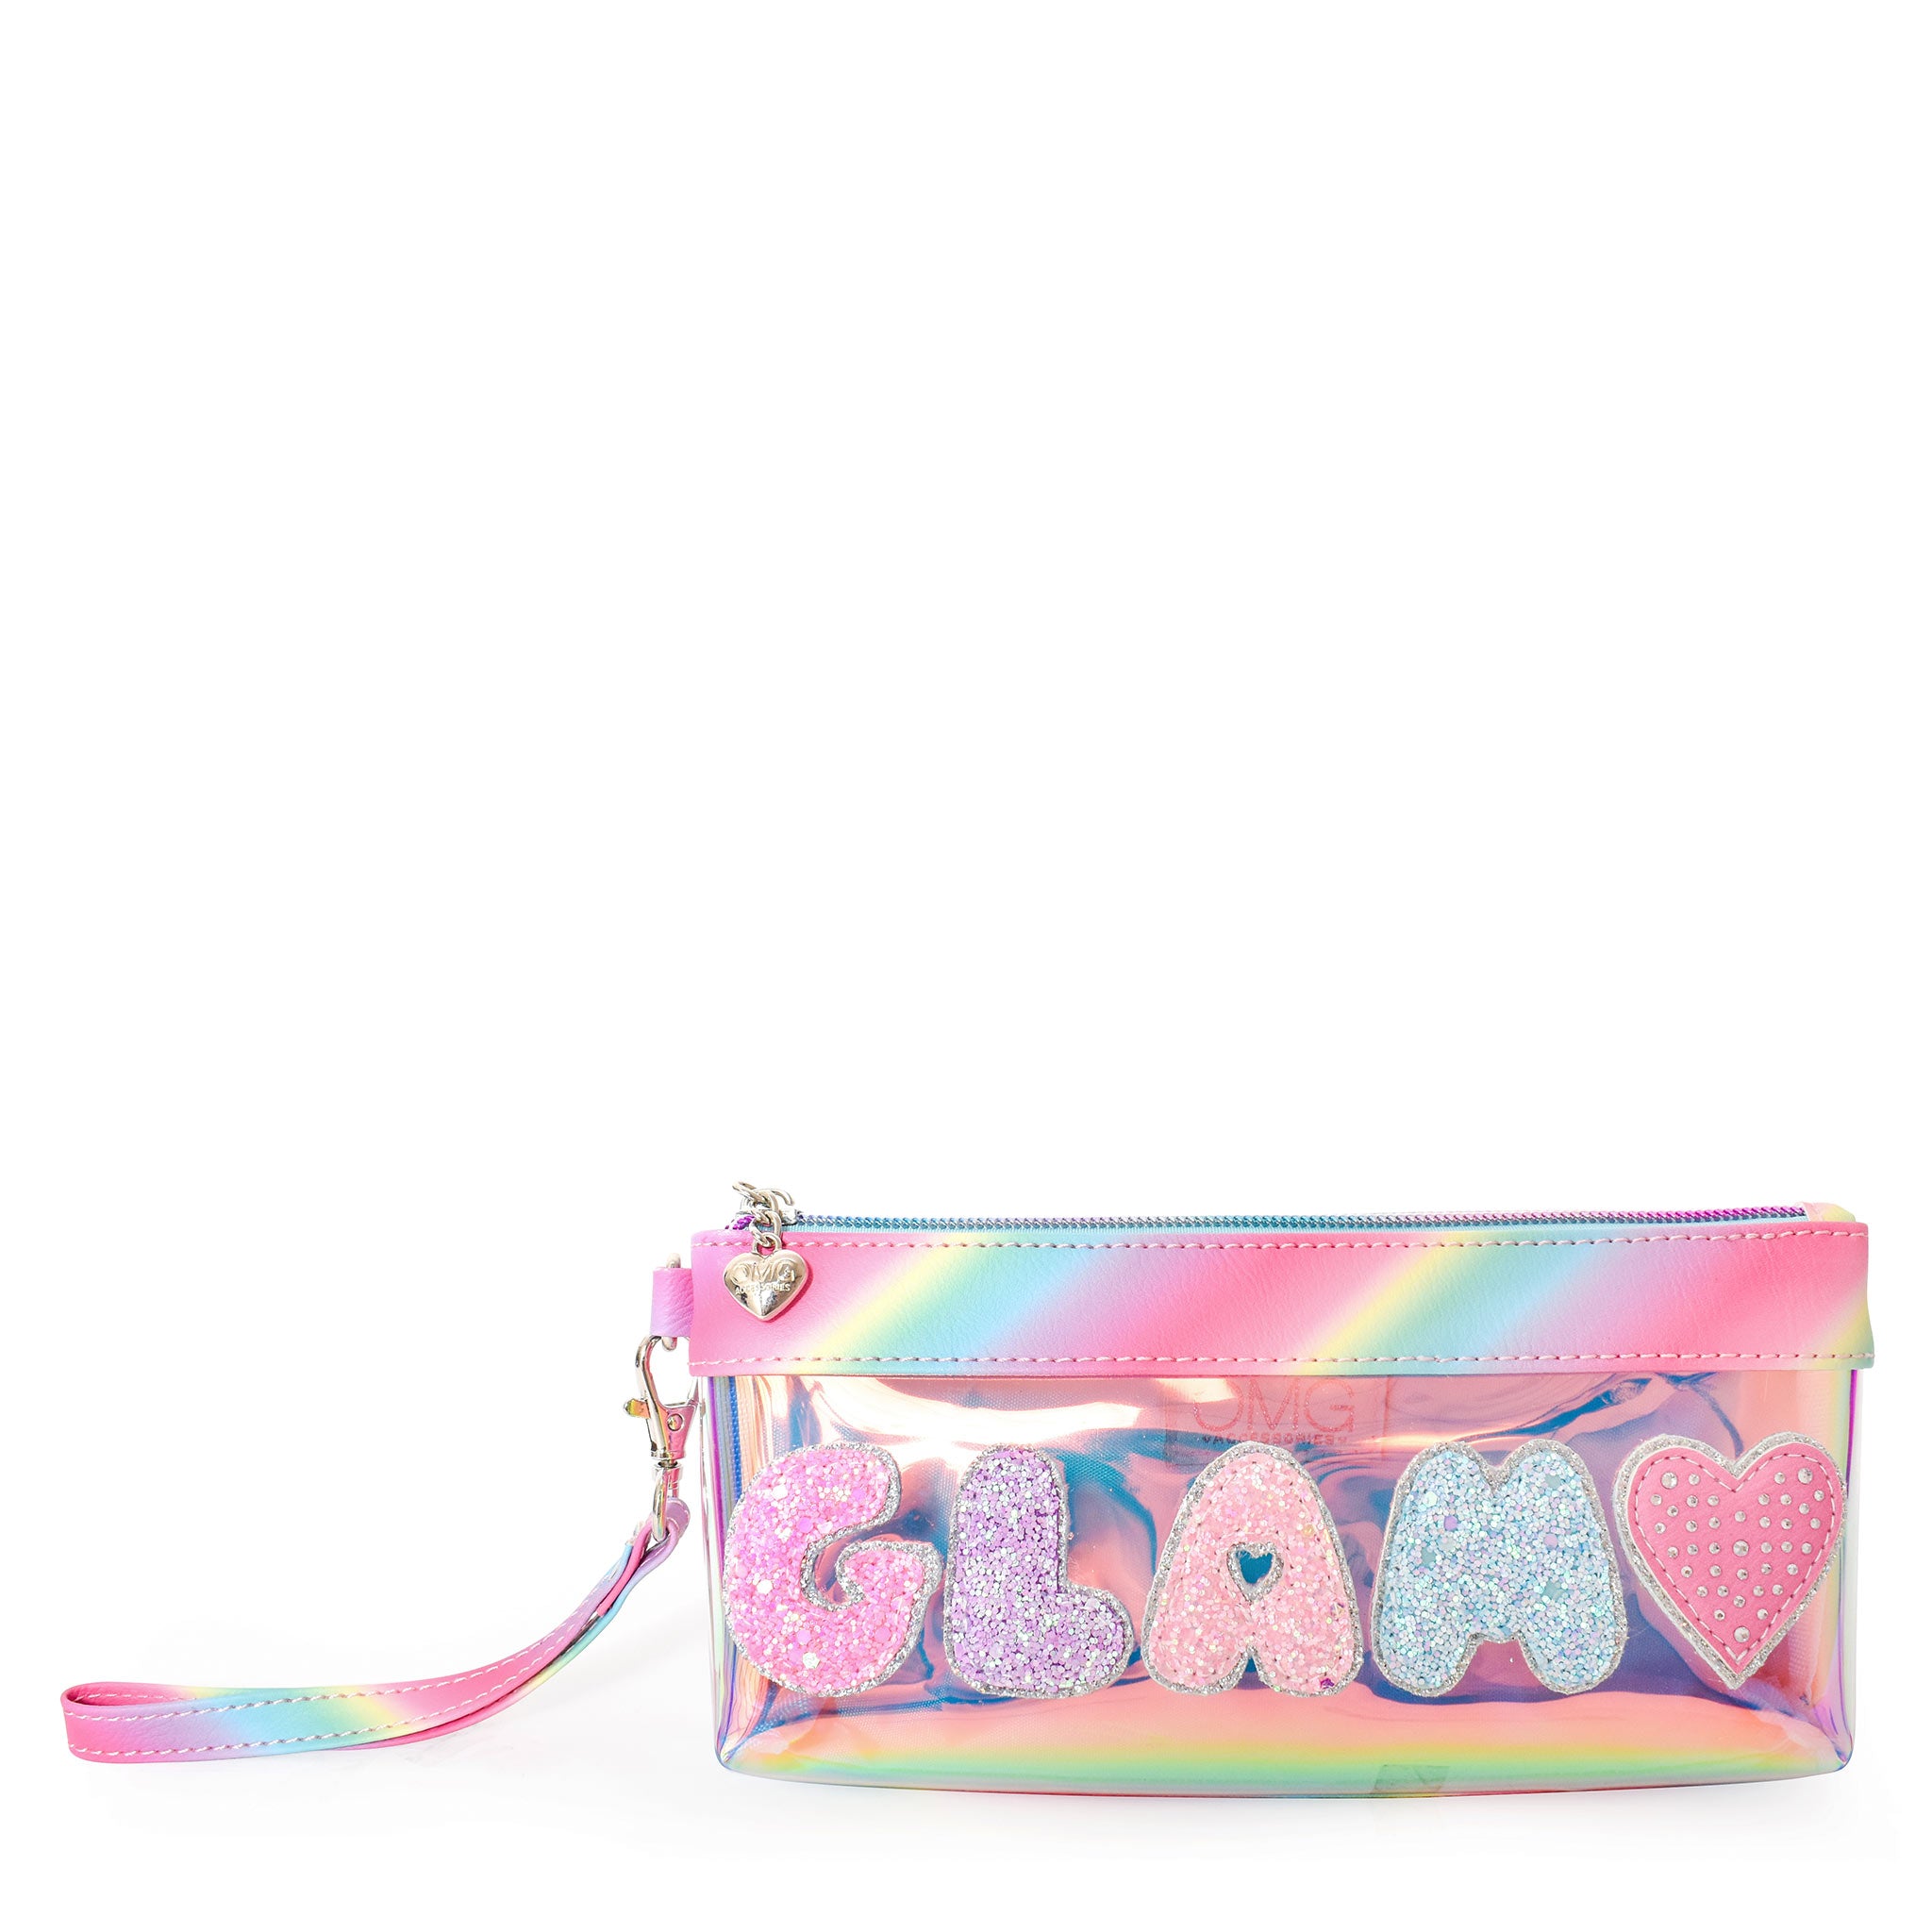 Front view of clear glazed ombre 'Glam' wristlet with glitter bubble-letter patches